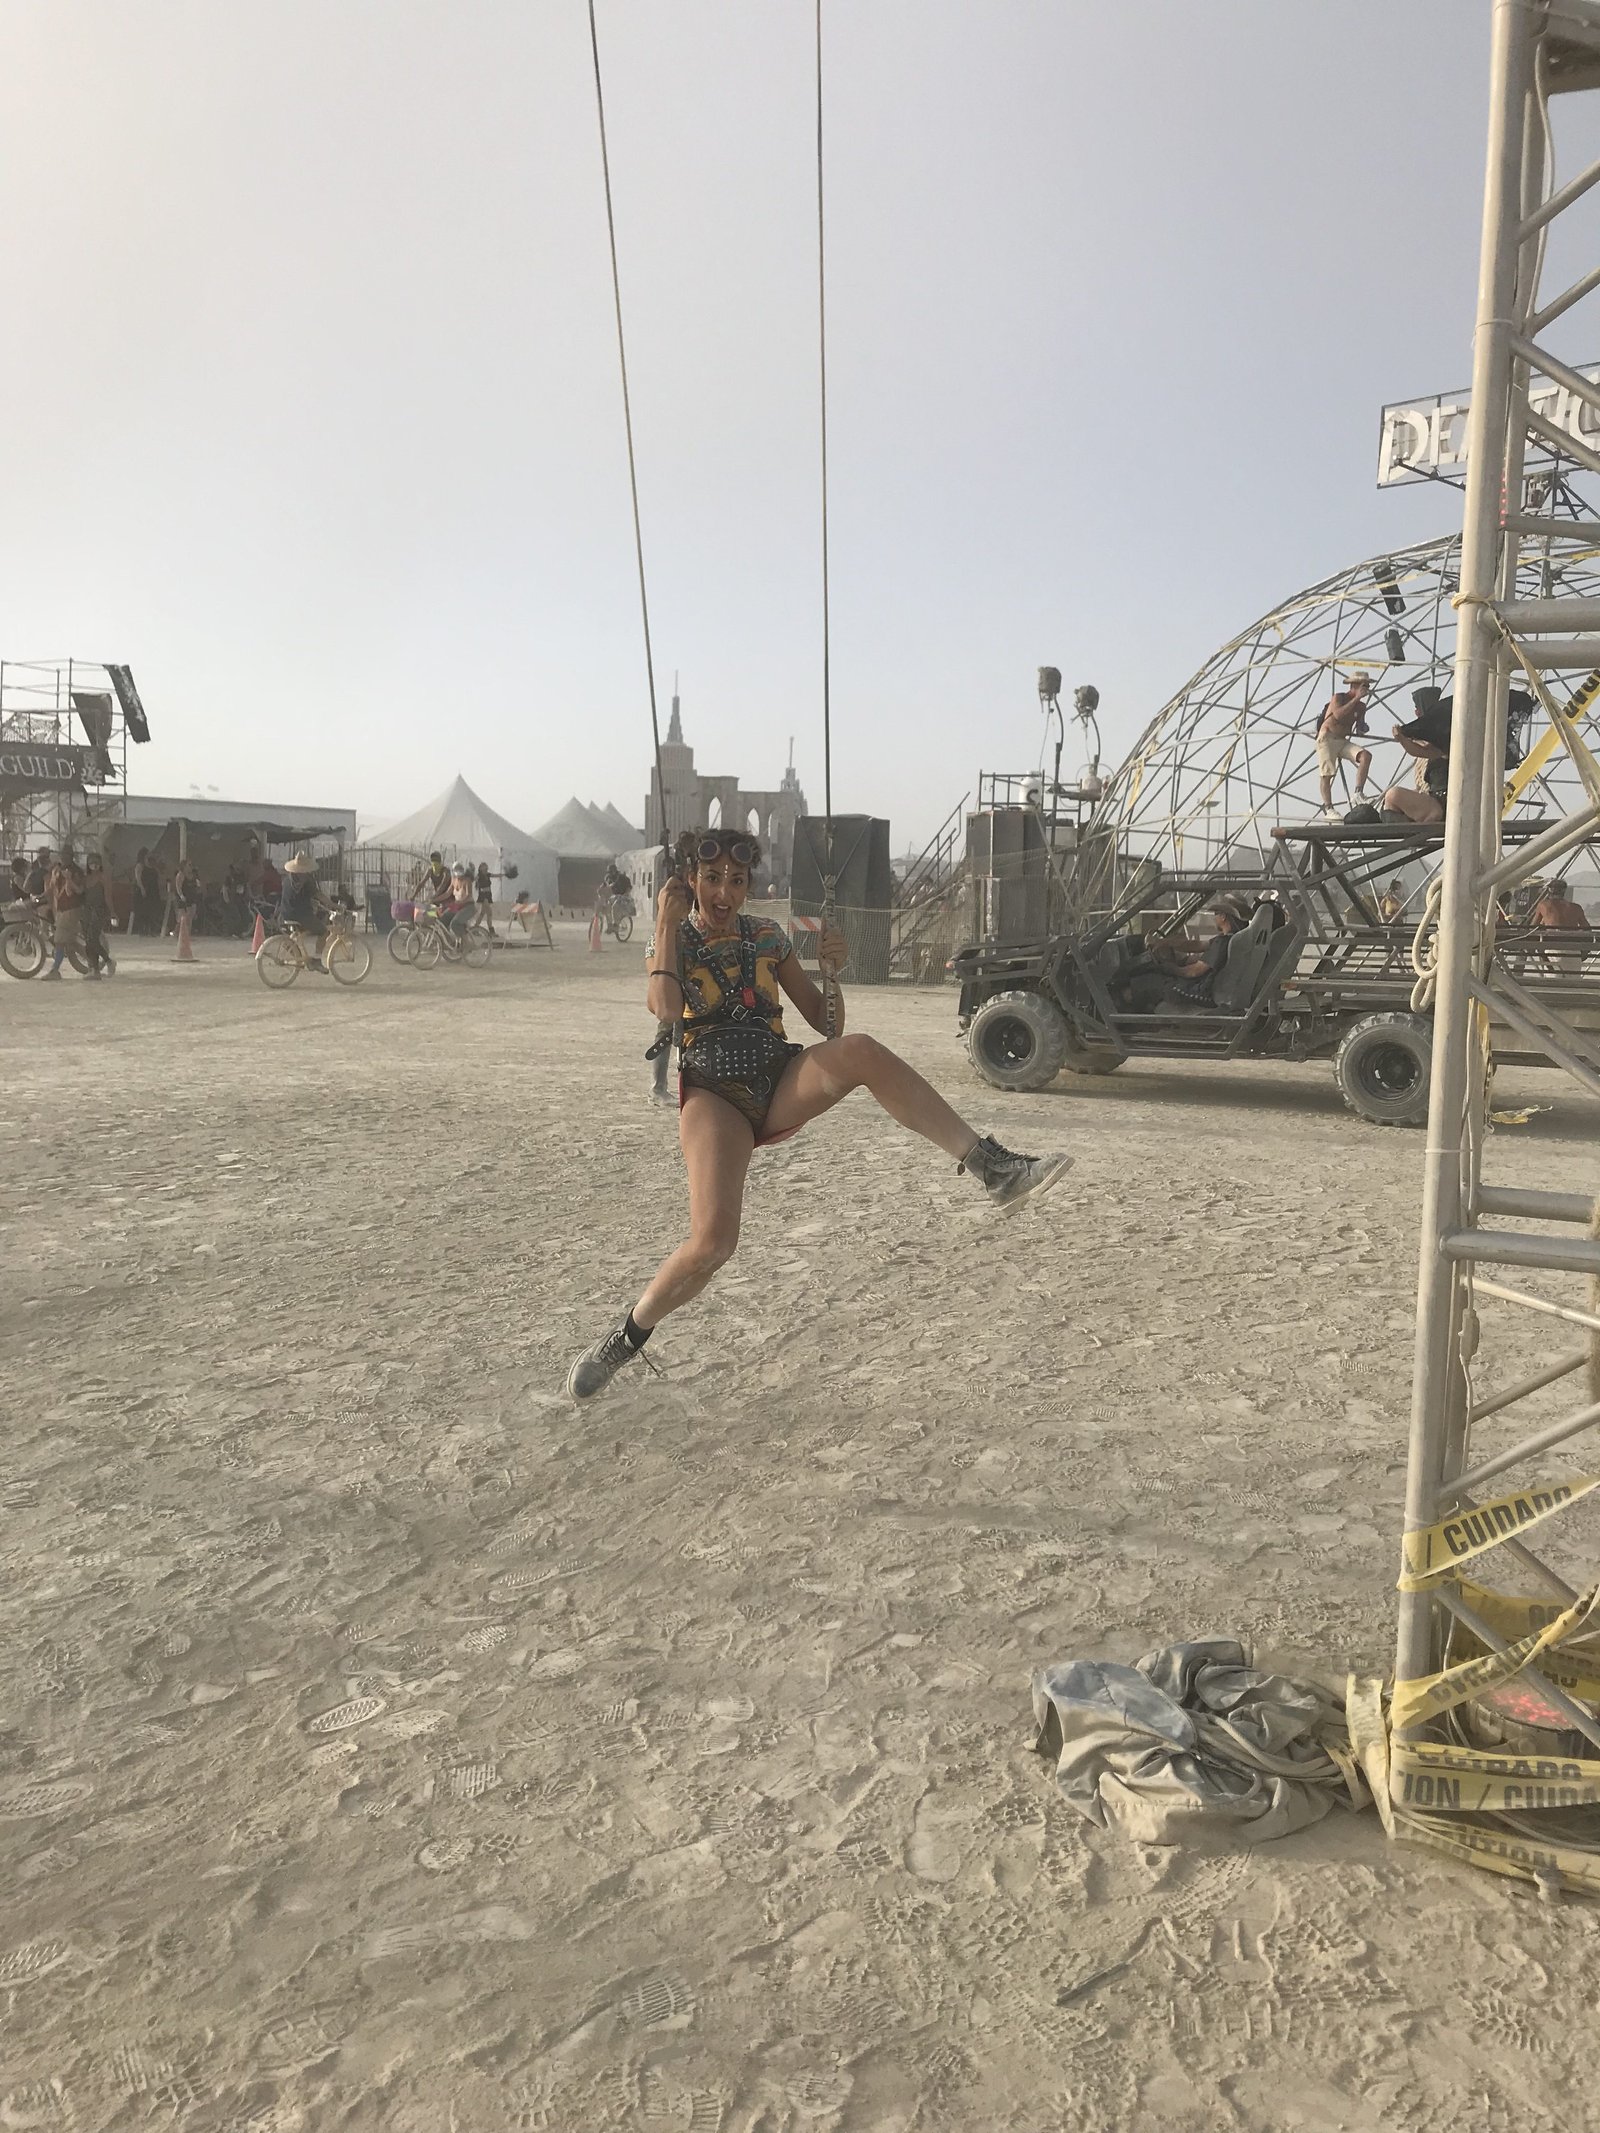 Burning Man 2018: The Festival’s Brutal Conditions, and How To Survive